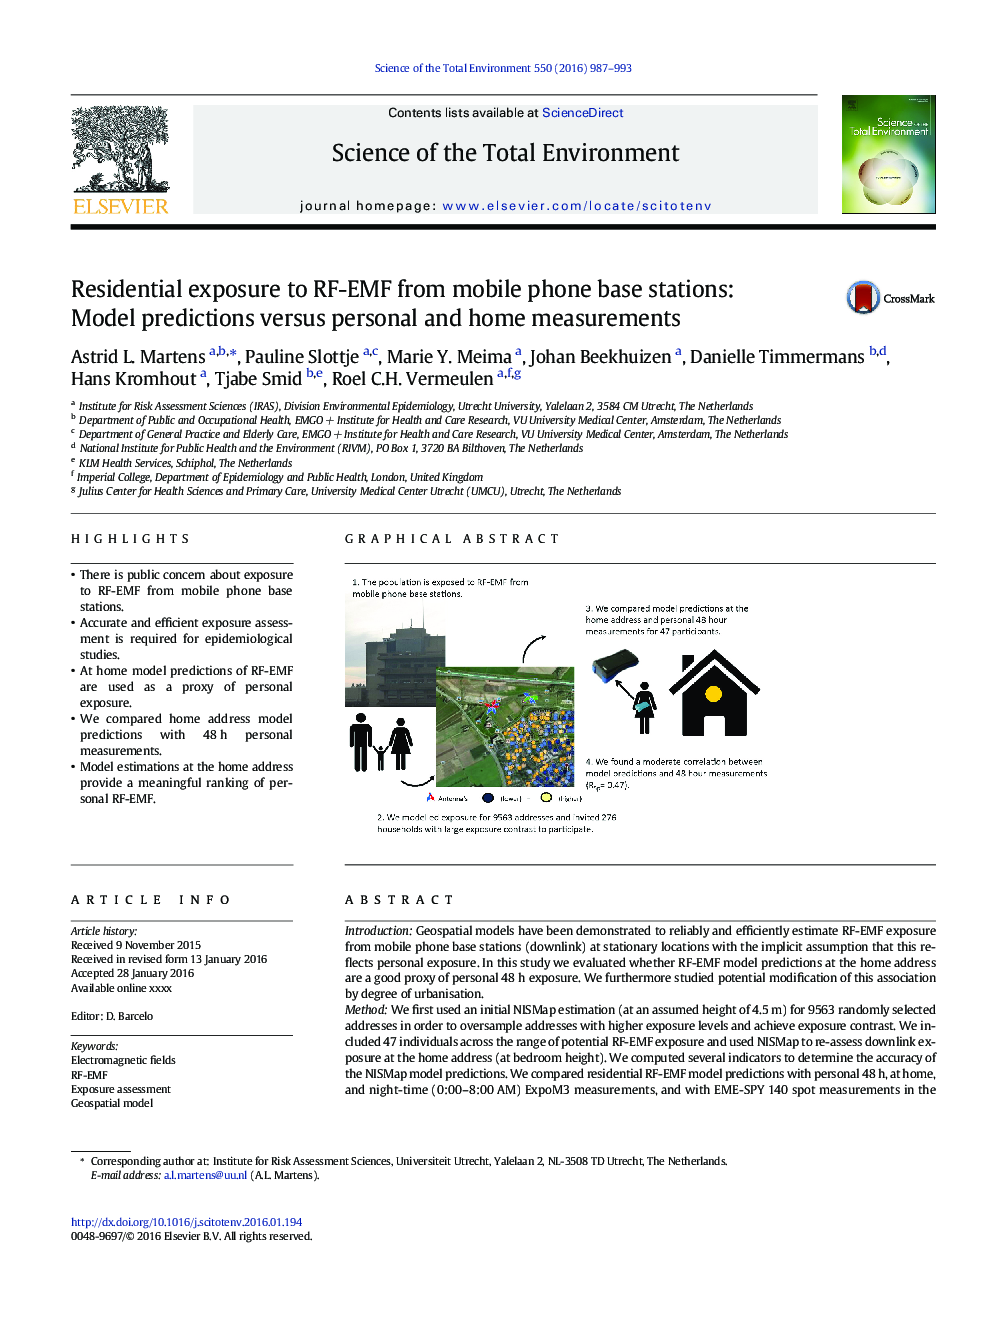 Residential exposure to RF-EMF from mobile phone base stations: Model predictions versus personal and home measurements